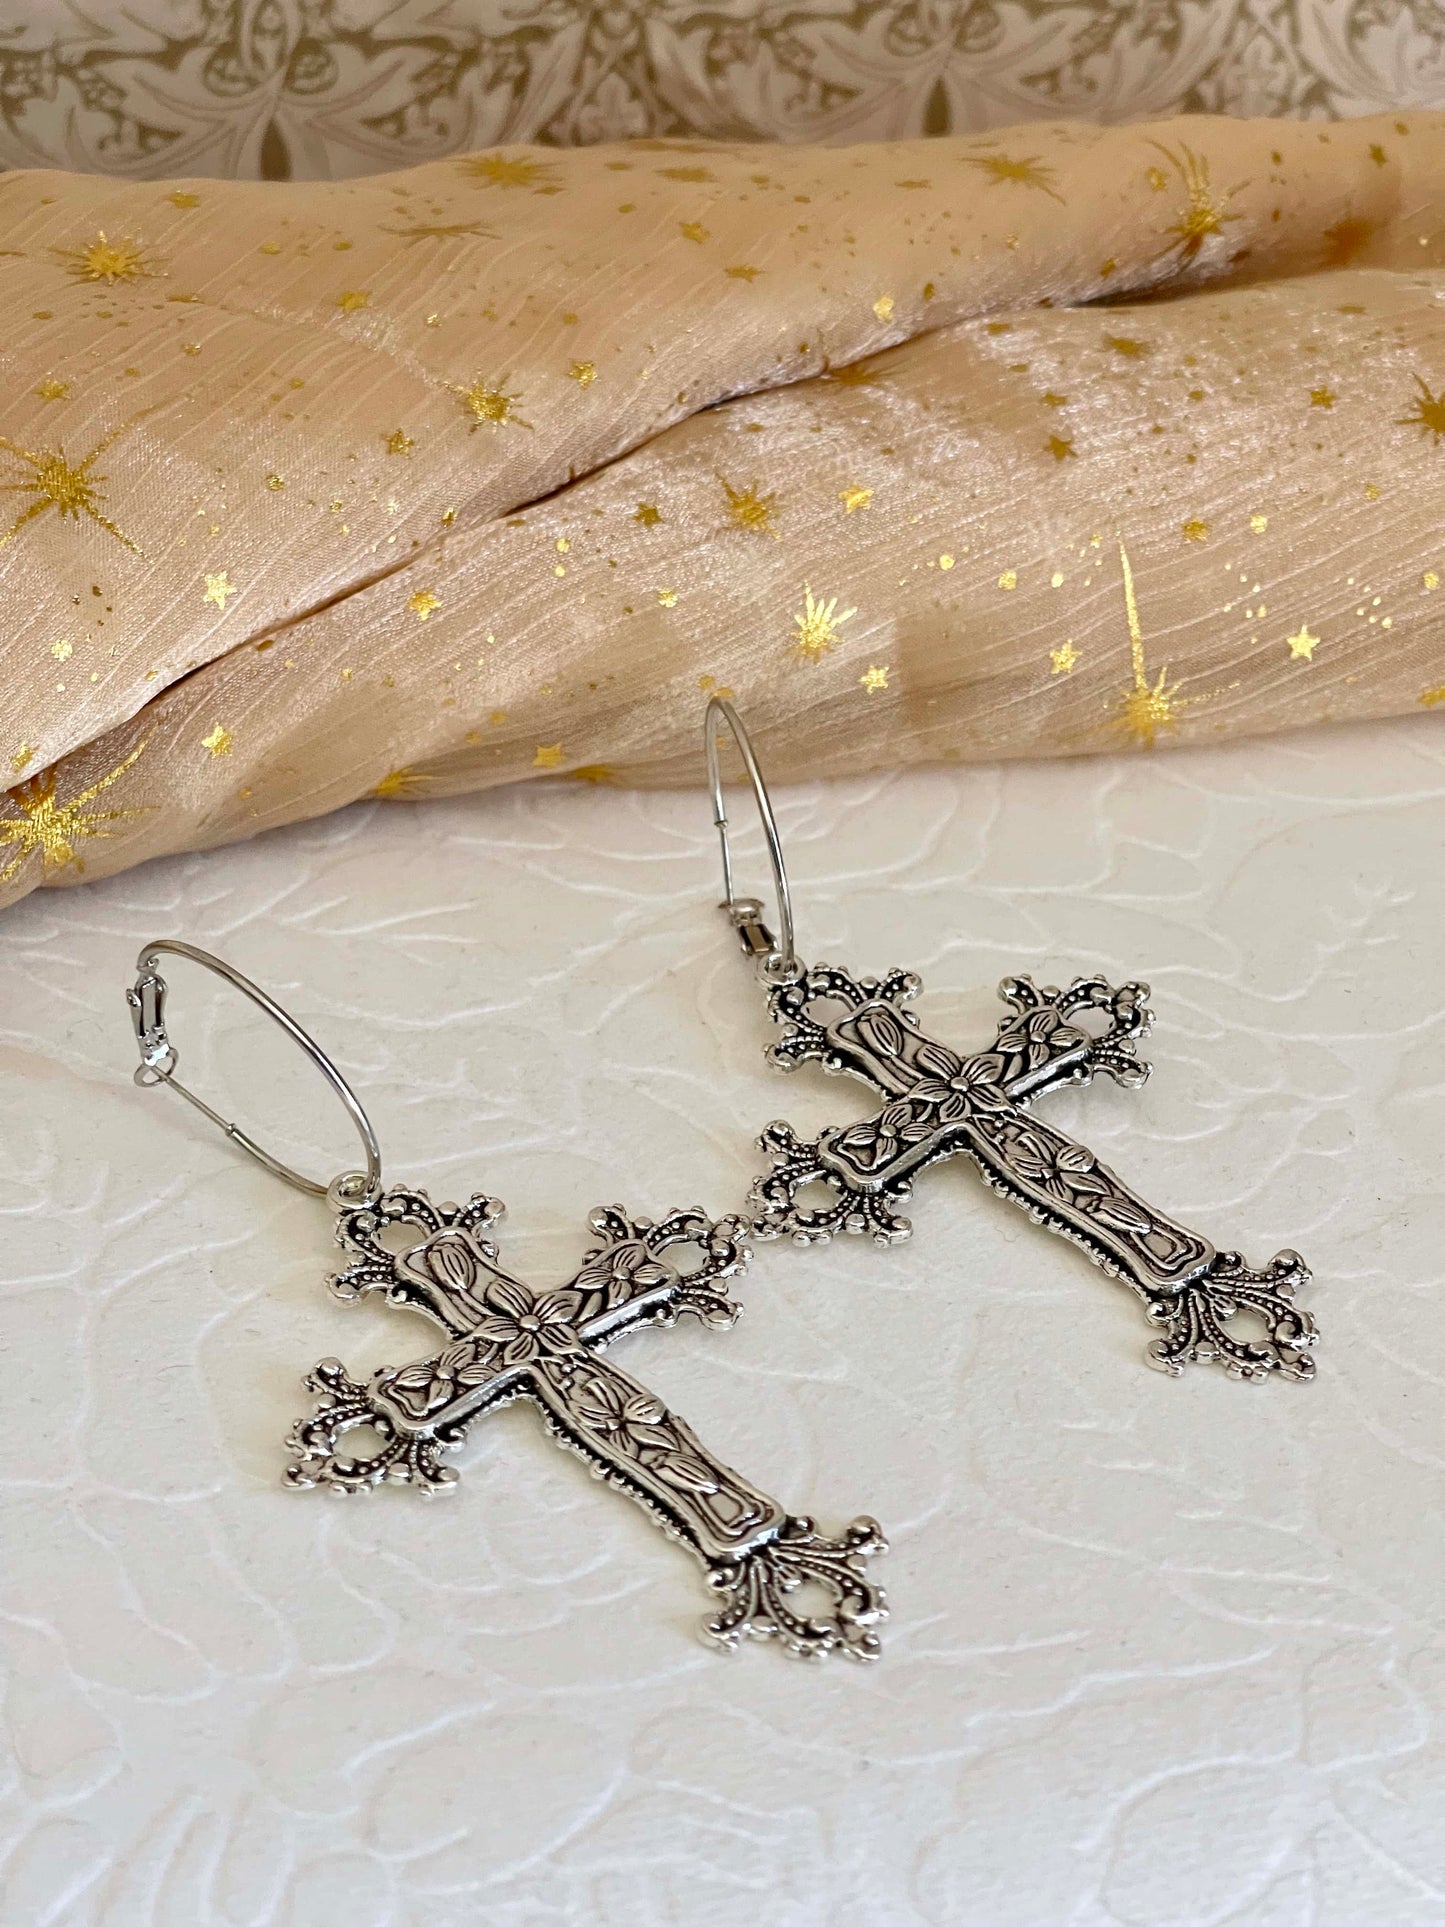 Historically inspired medieval renaissance baroque victorian large ornate metal cross earrings in silver. Floral design.